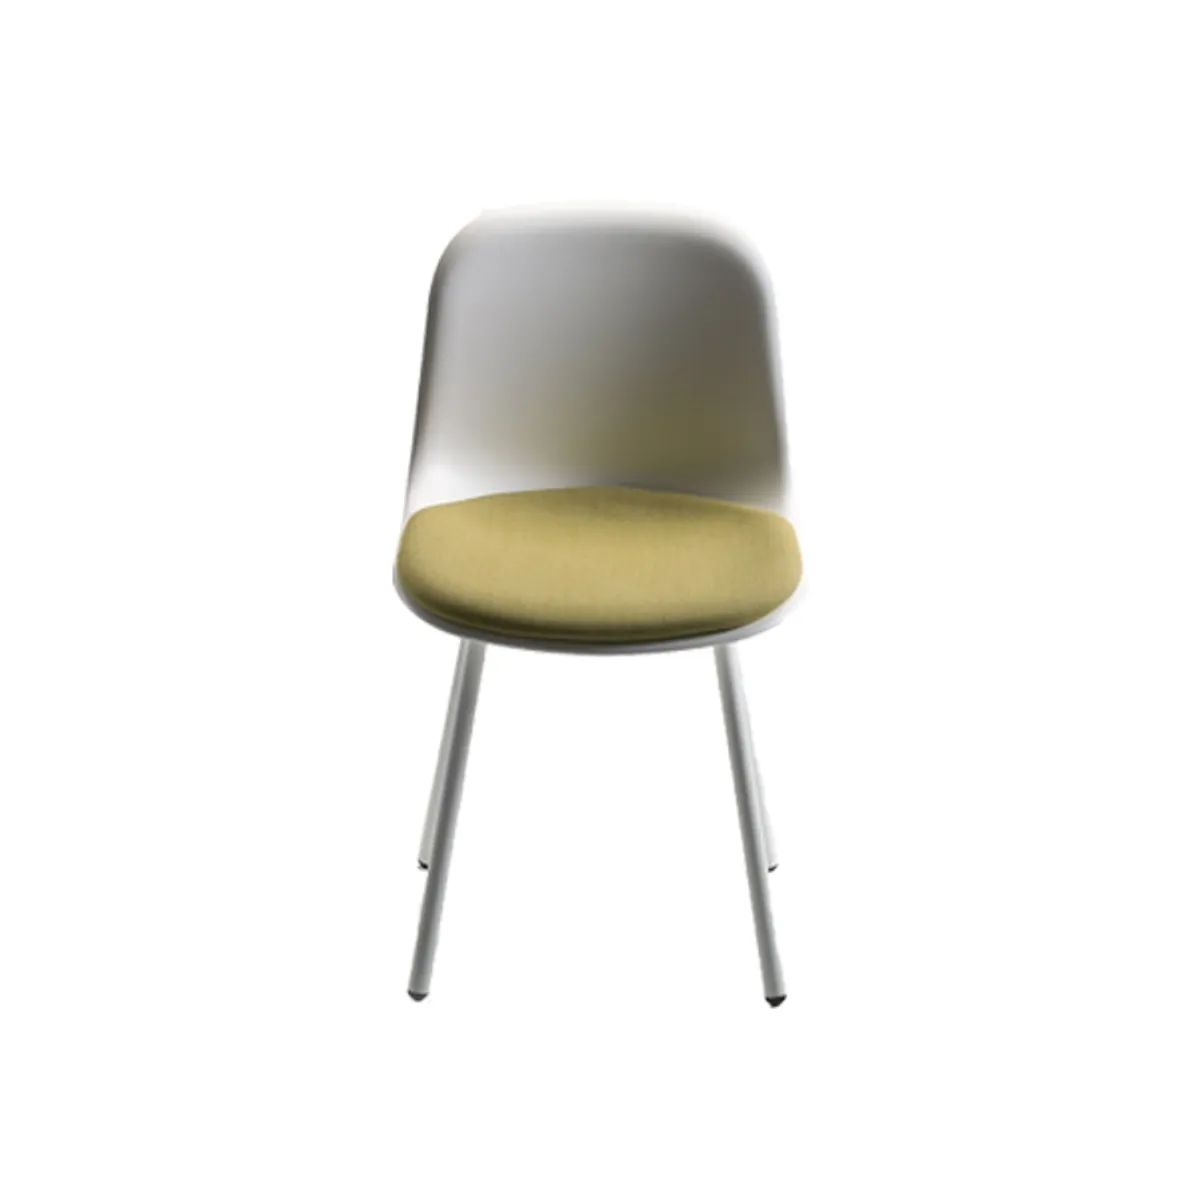 Manipolymetalsidechair Inside Out Contracts2